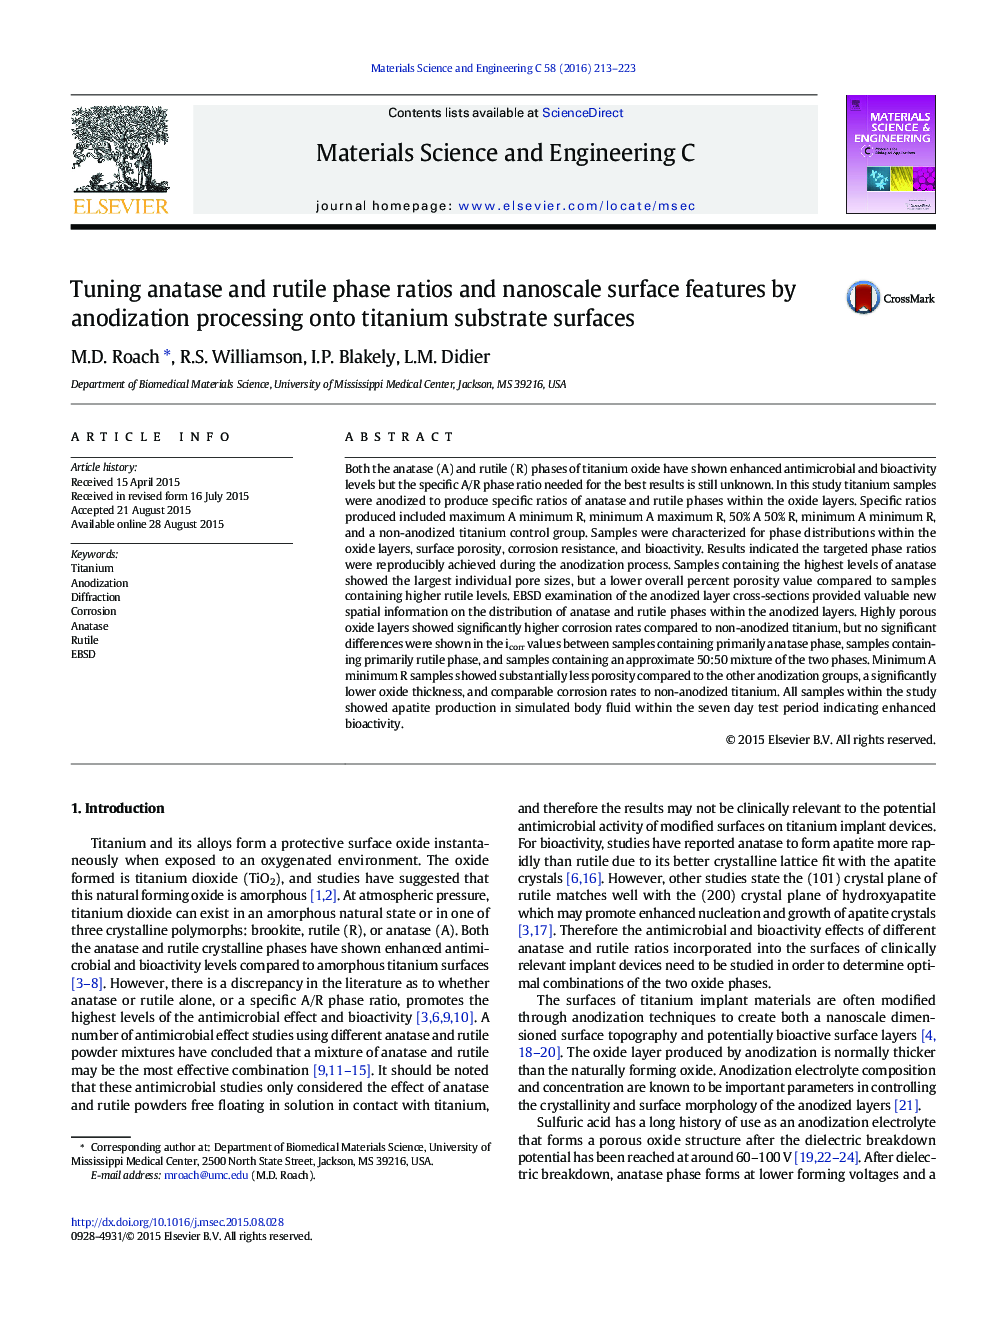 Tuning anatase and rutile phase ratios and nanoscale surface features by anodization processing onto titanium substrate surfaces